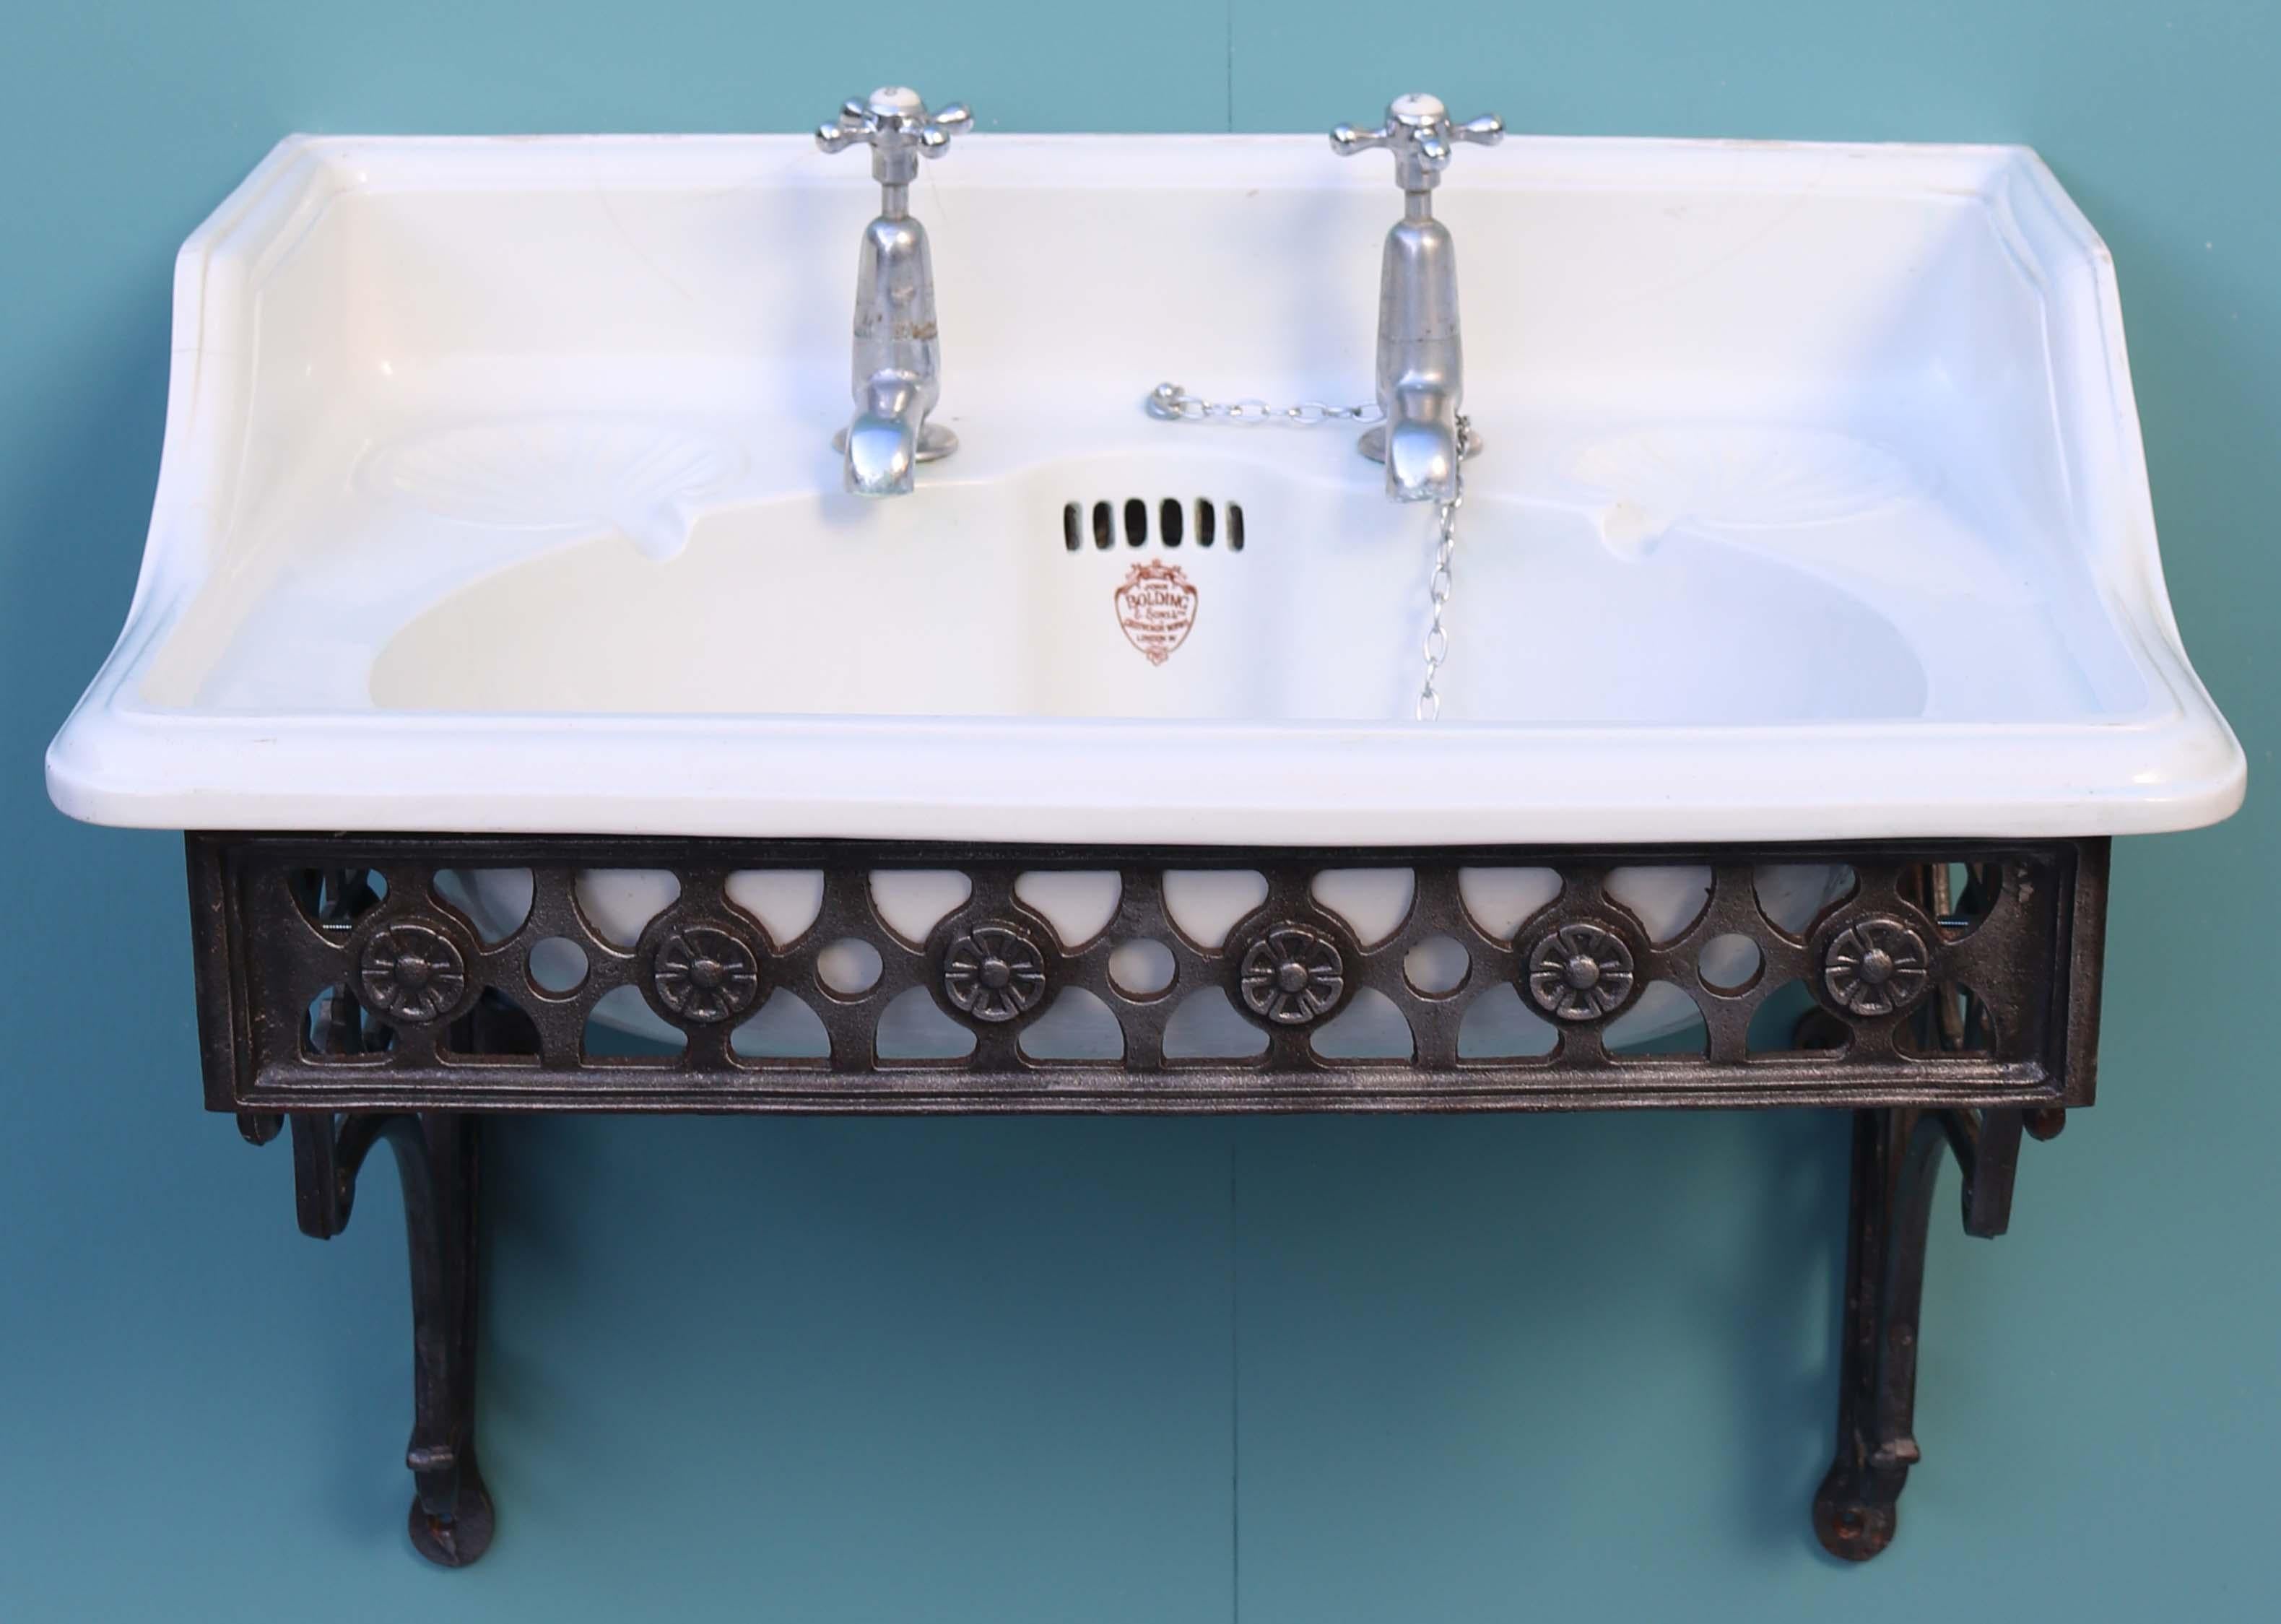 A reclaimed antique sink with a burnished wall mounted cast iron wall bracket.

Condition report

Good structural condition. The taps turn, however they are not tested. There are several hairline cracks to the up-stand or splash back at the back